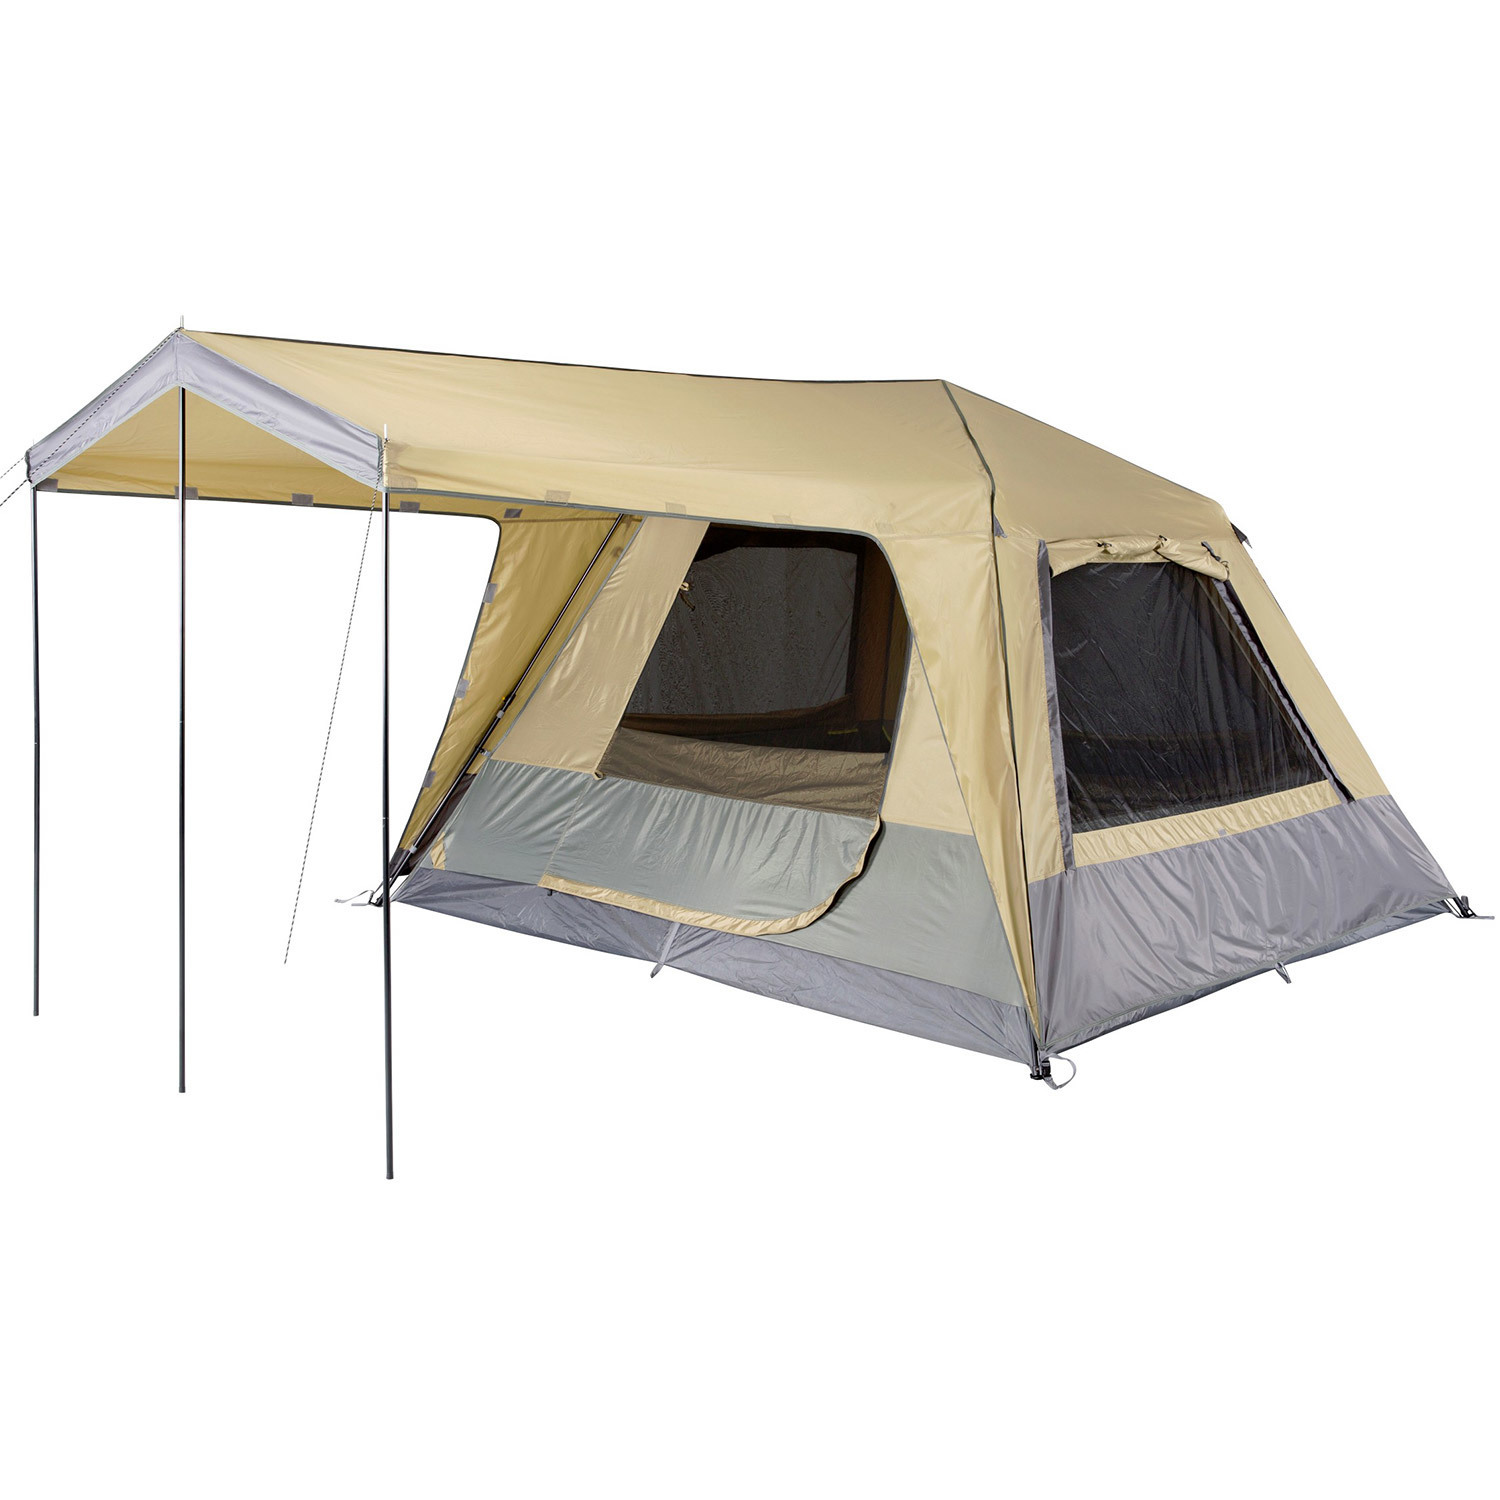 OZtrail Fast Frame Tourer 300 Tent, Instant Up Camping 6 Person Tent 9320531063031 | eBay